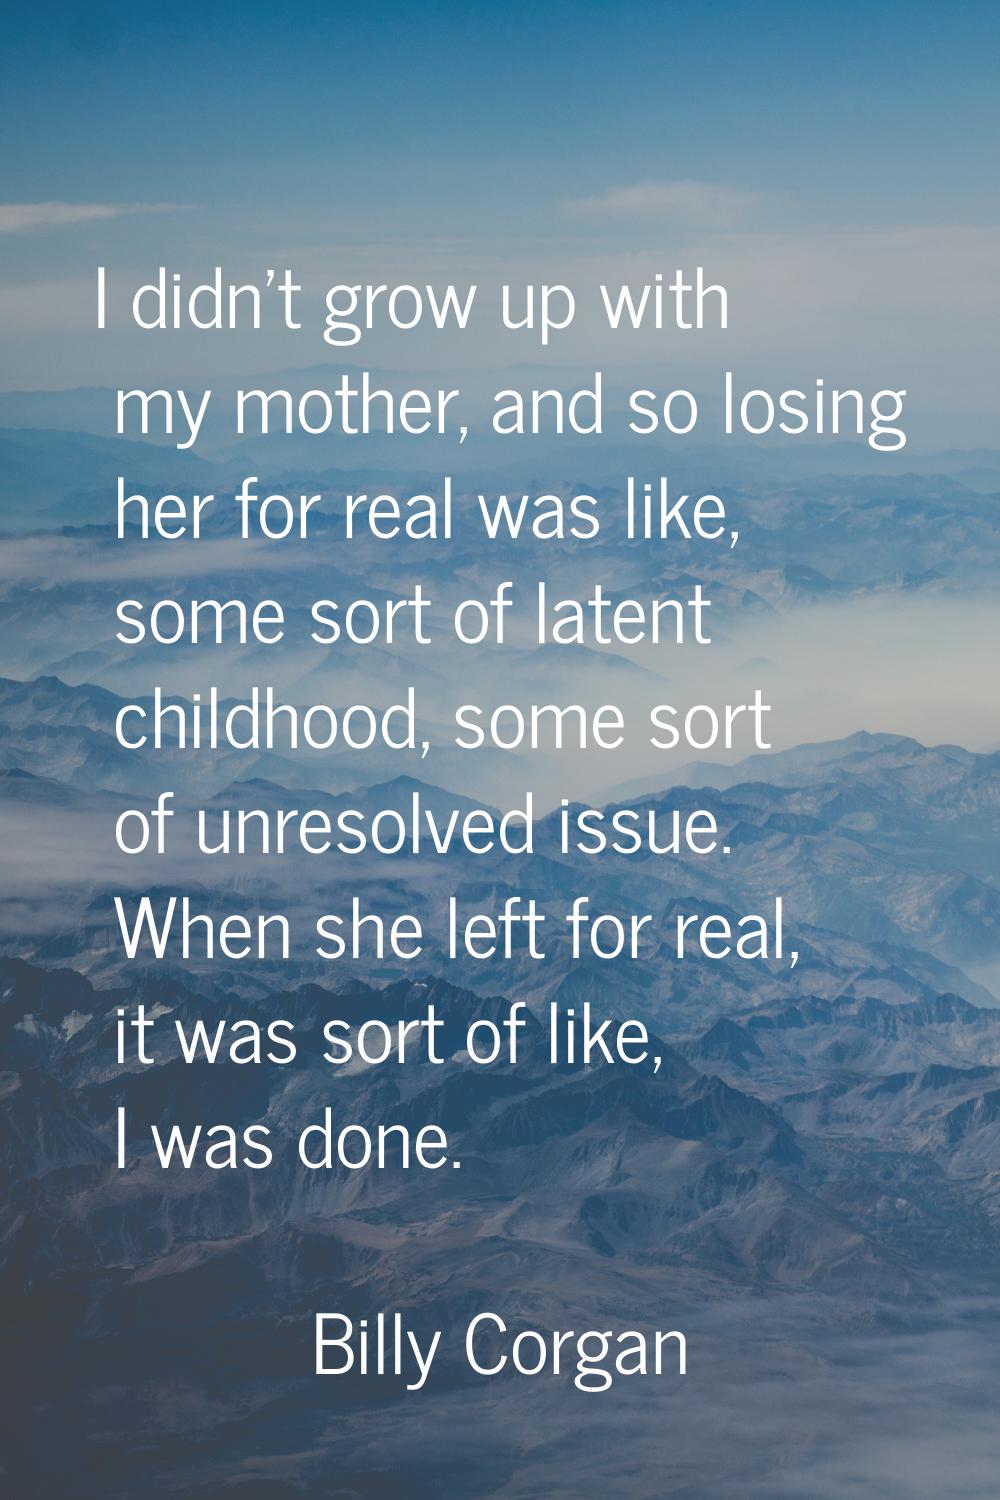 I didn't grow up with my mother, and so losing her for real was like, some sort of latent childhood